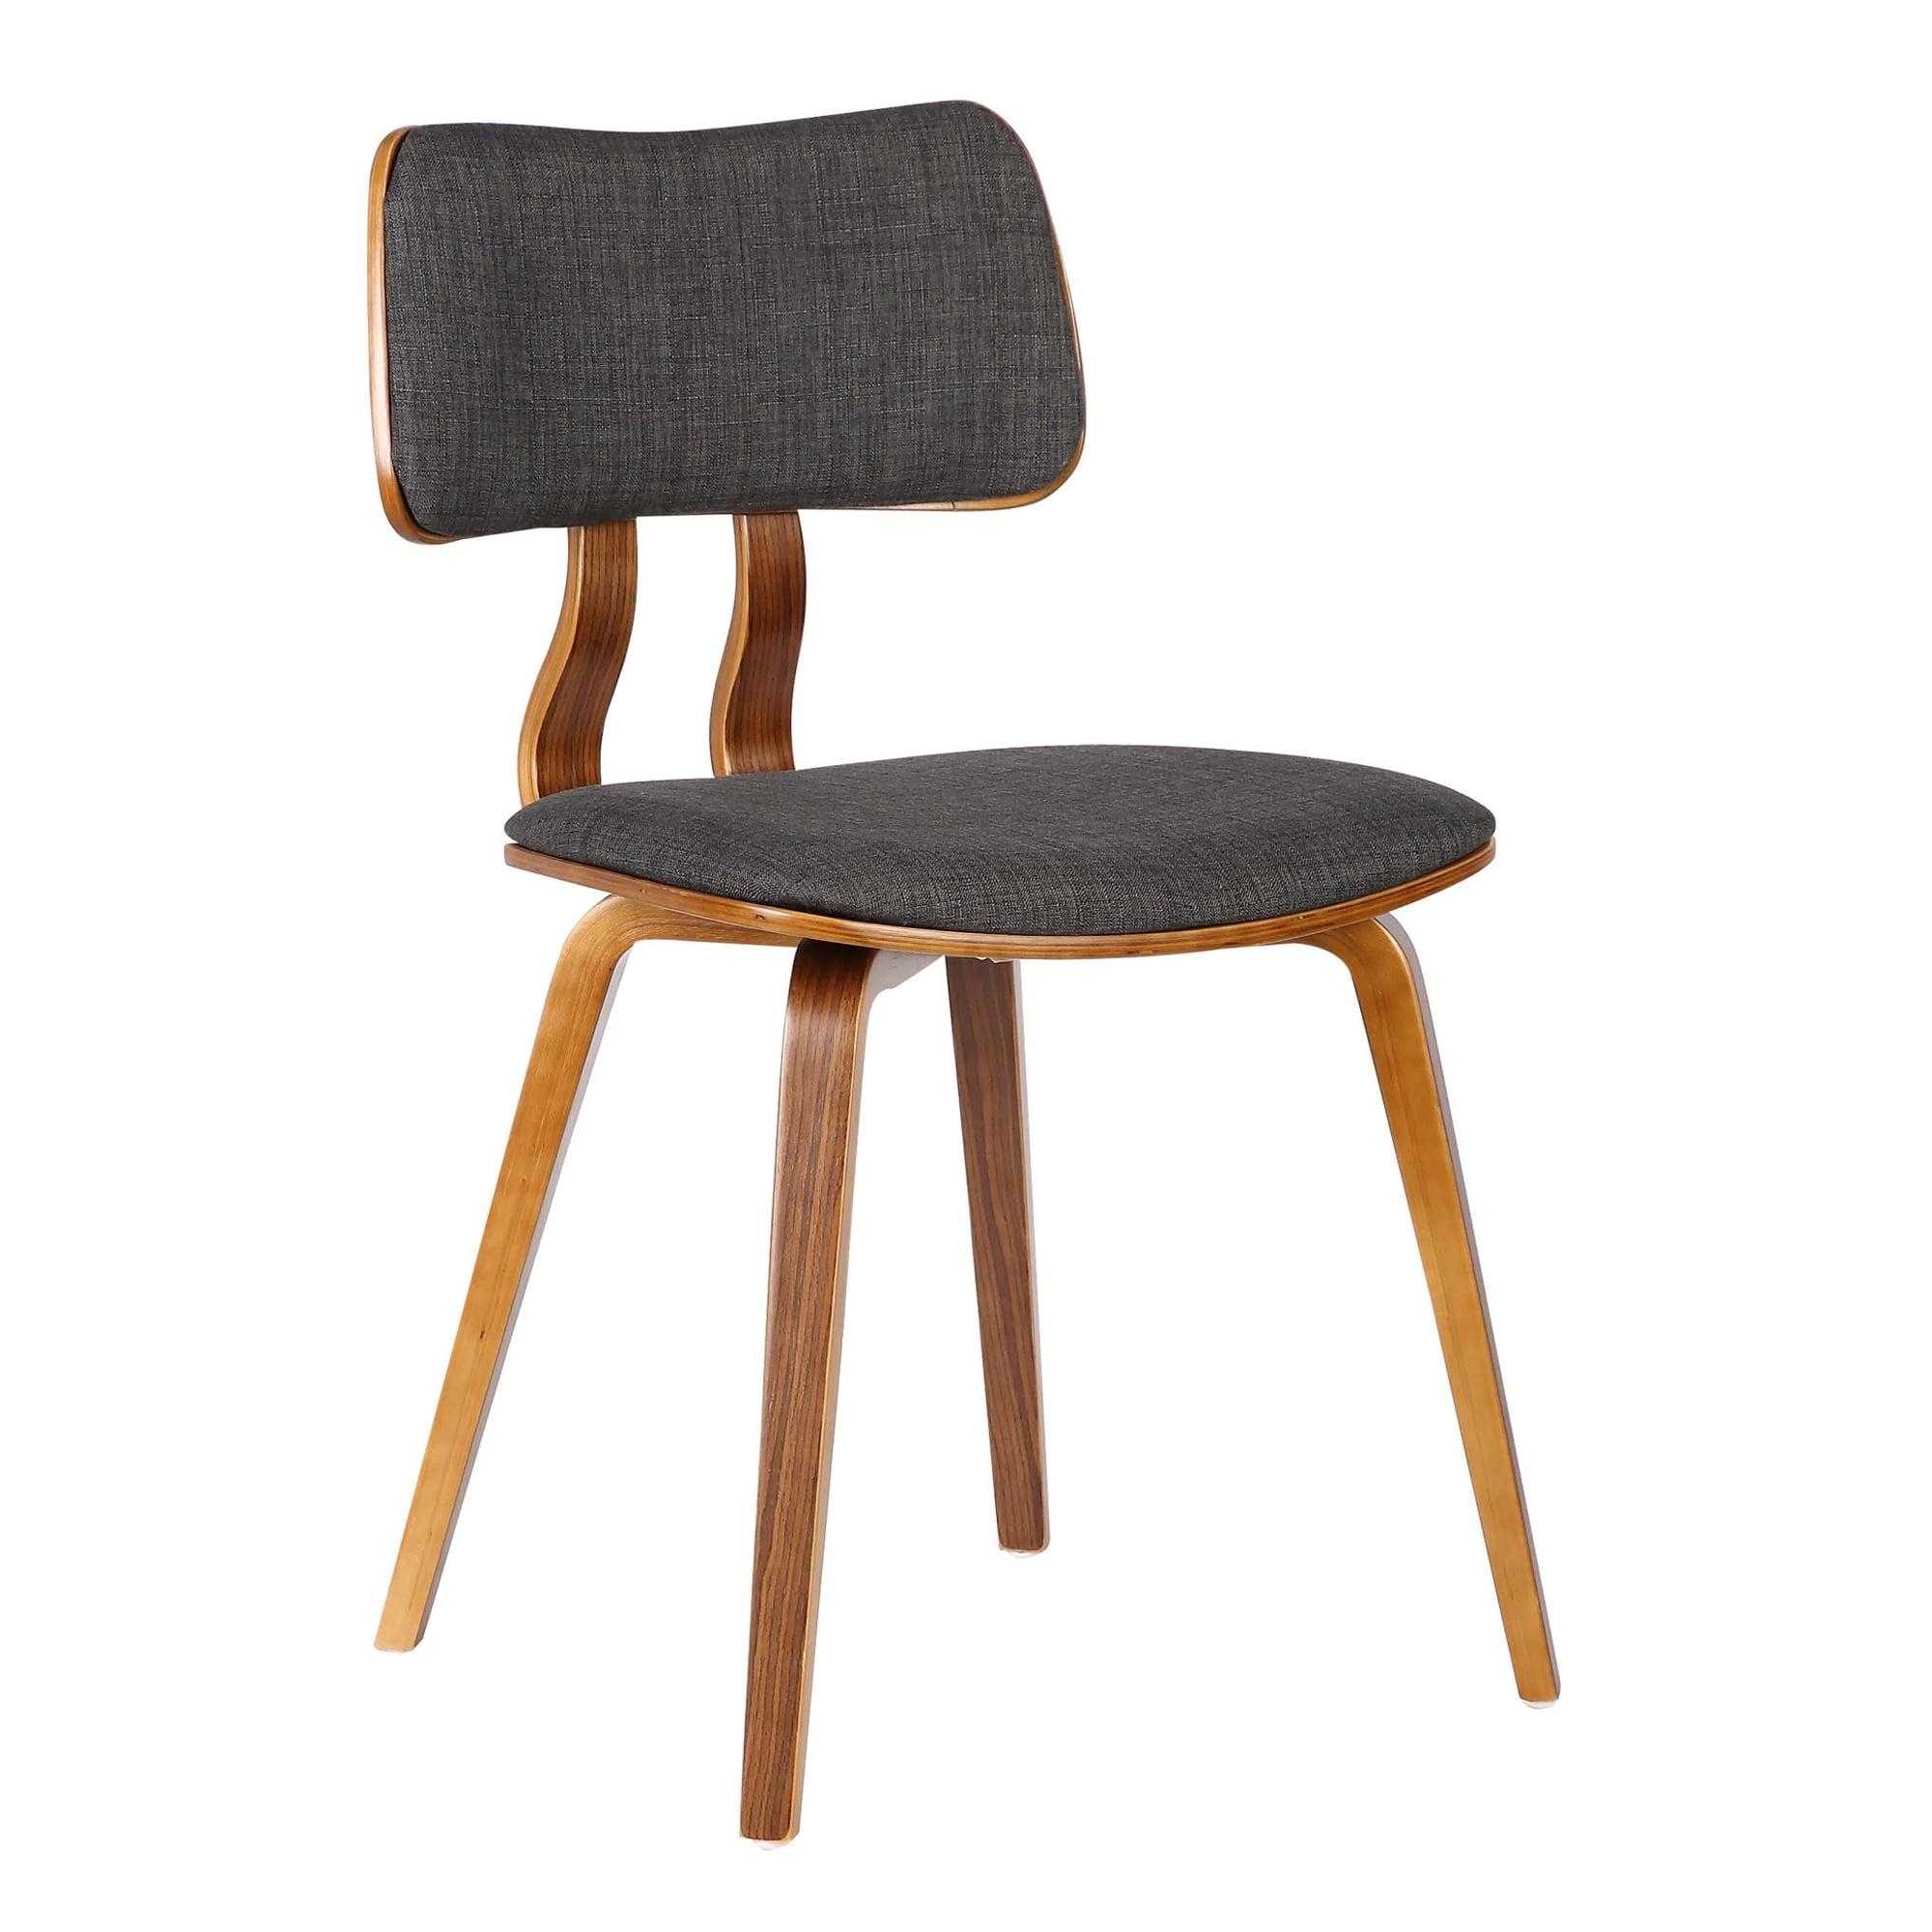 Walnut Wood & Charcoal Upholstered Low Side Chair